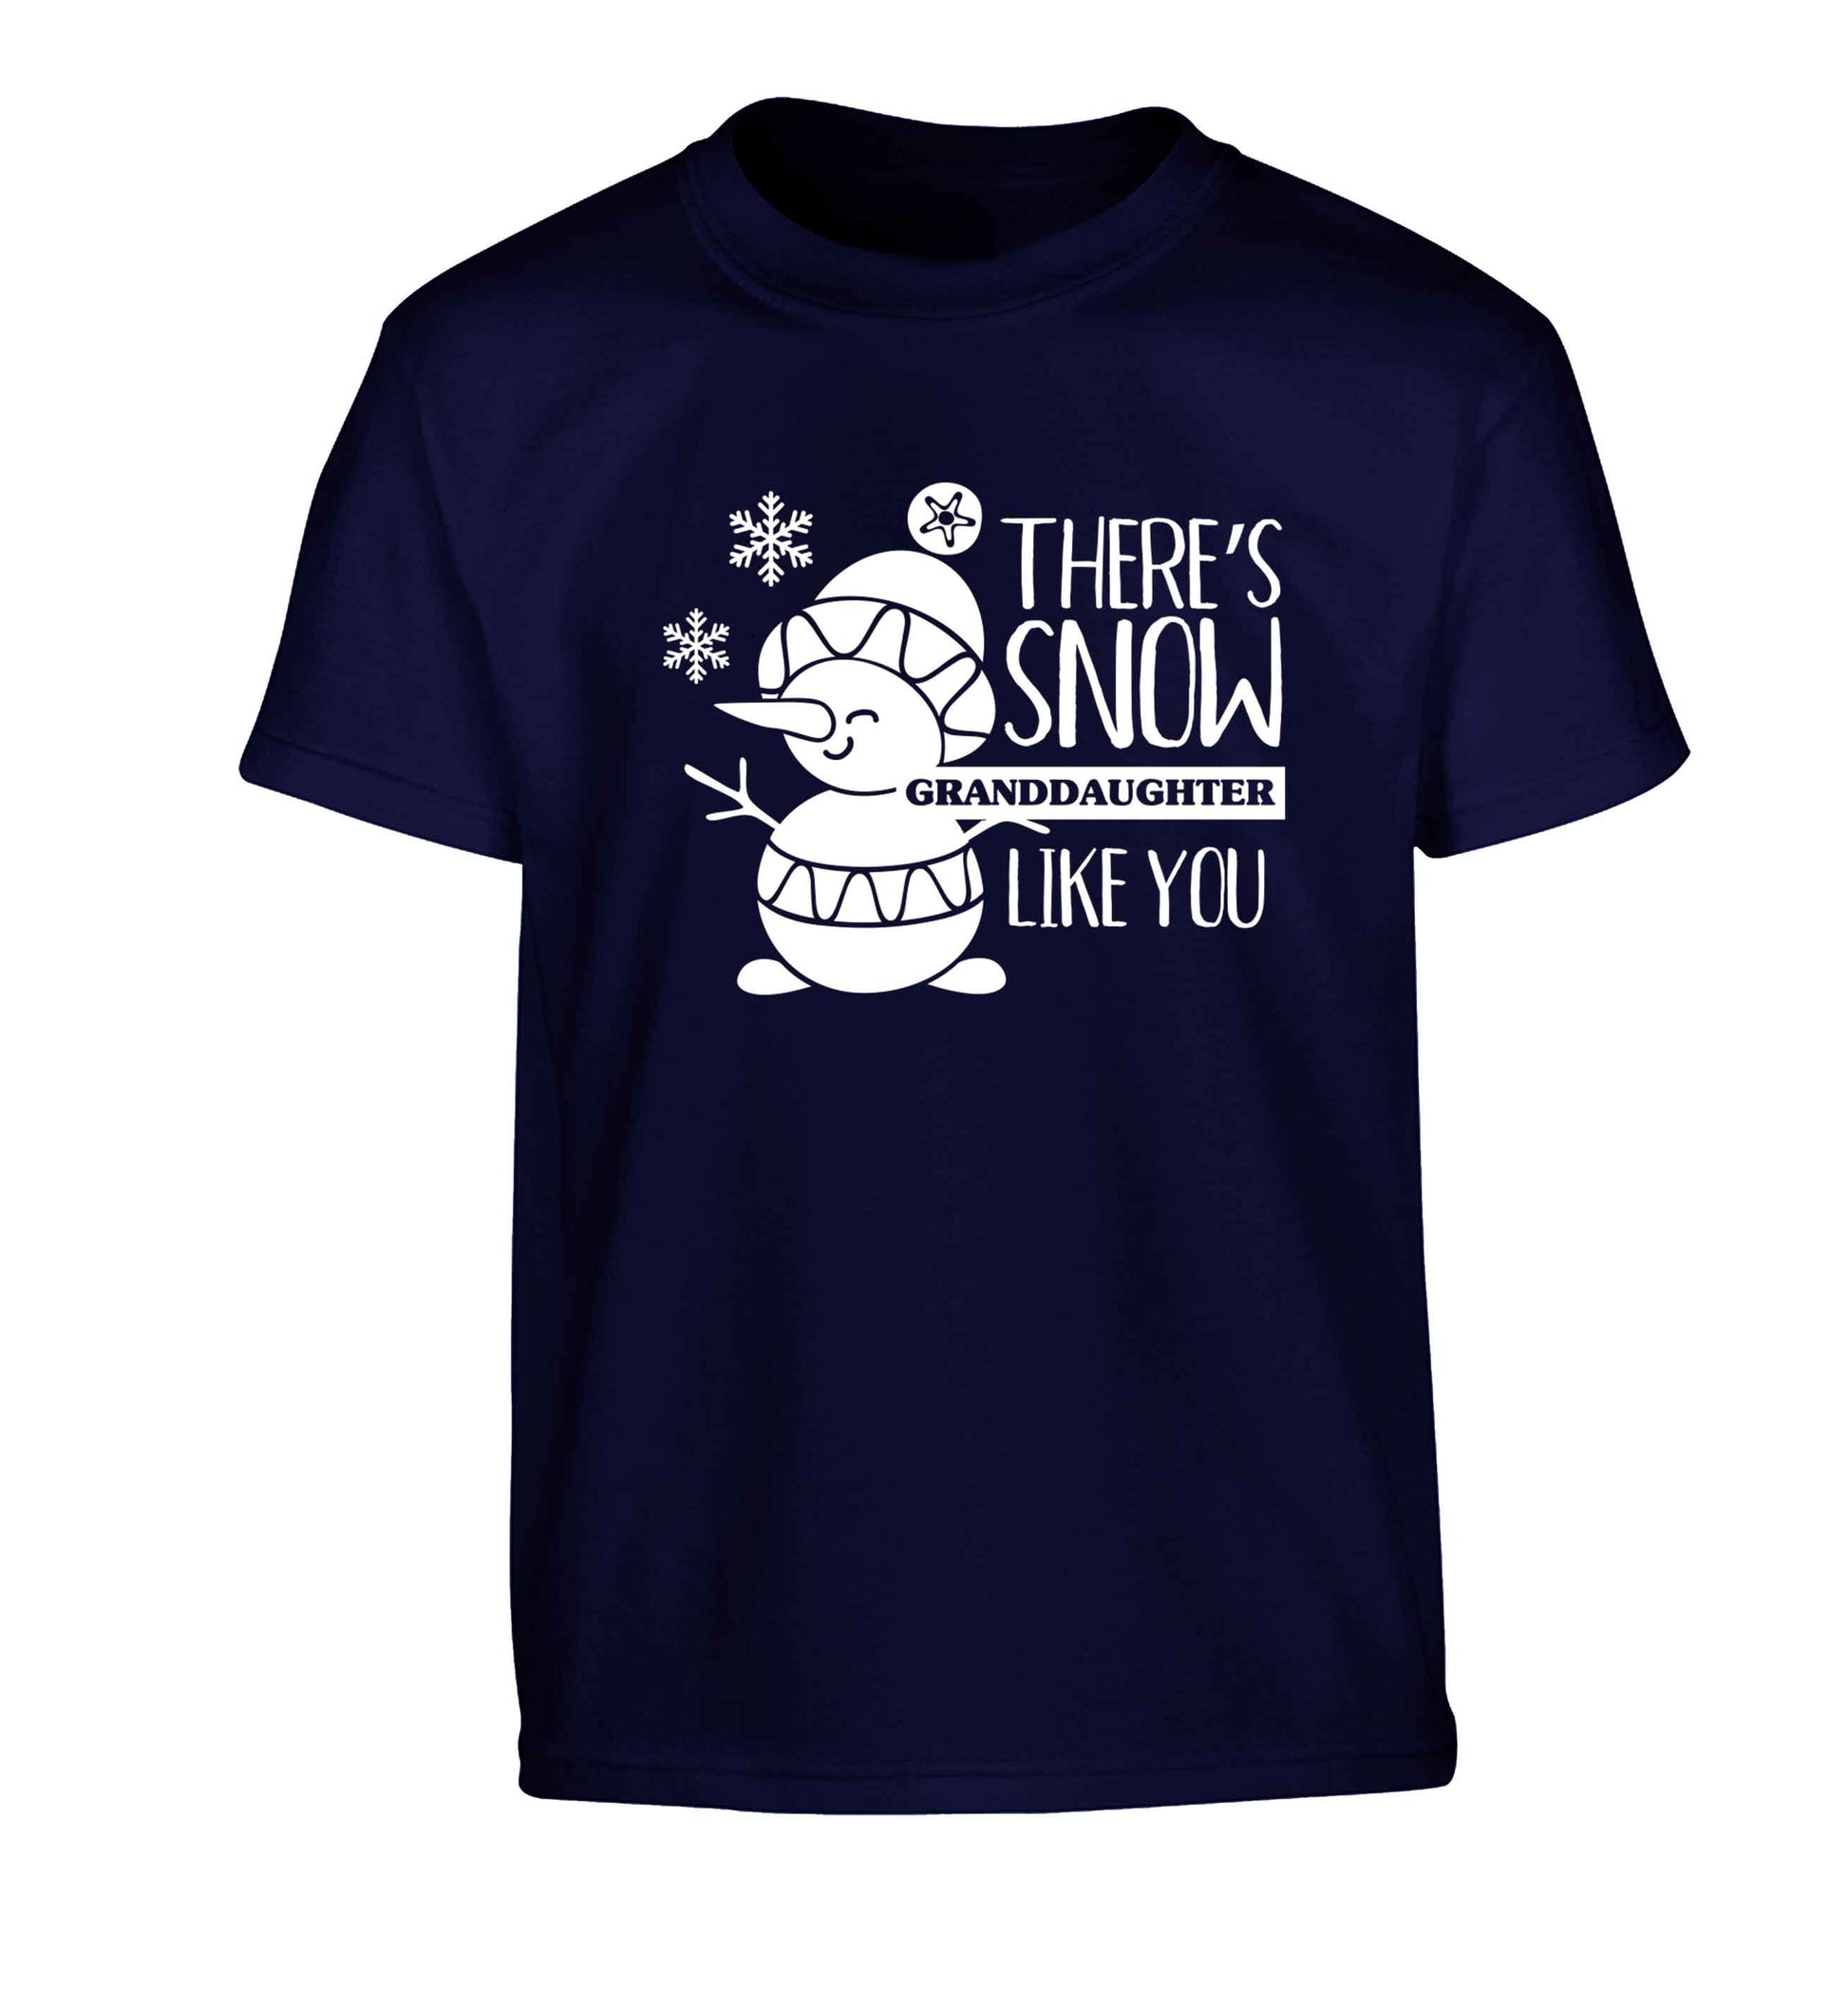 There's snow granddaughter like you Children's navy Tshirt 12-13 Years